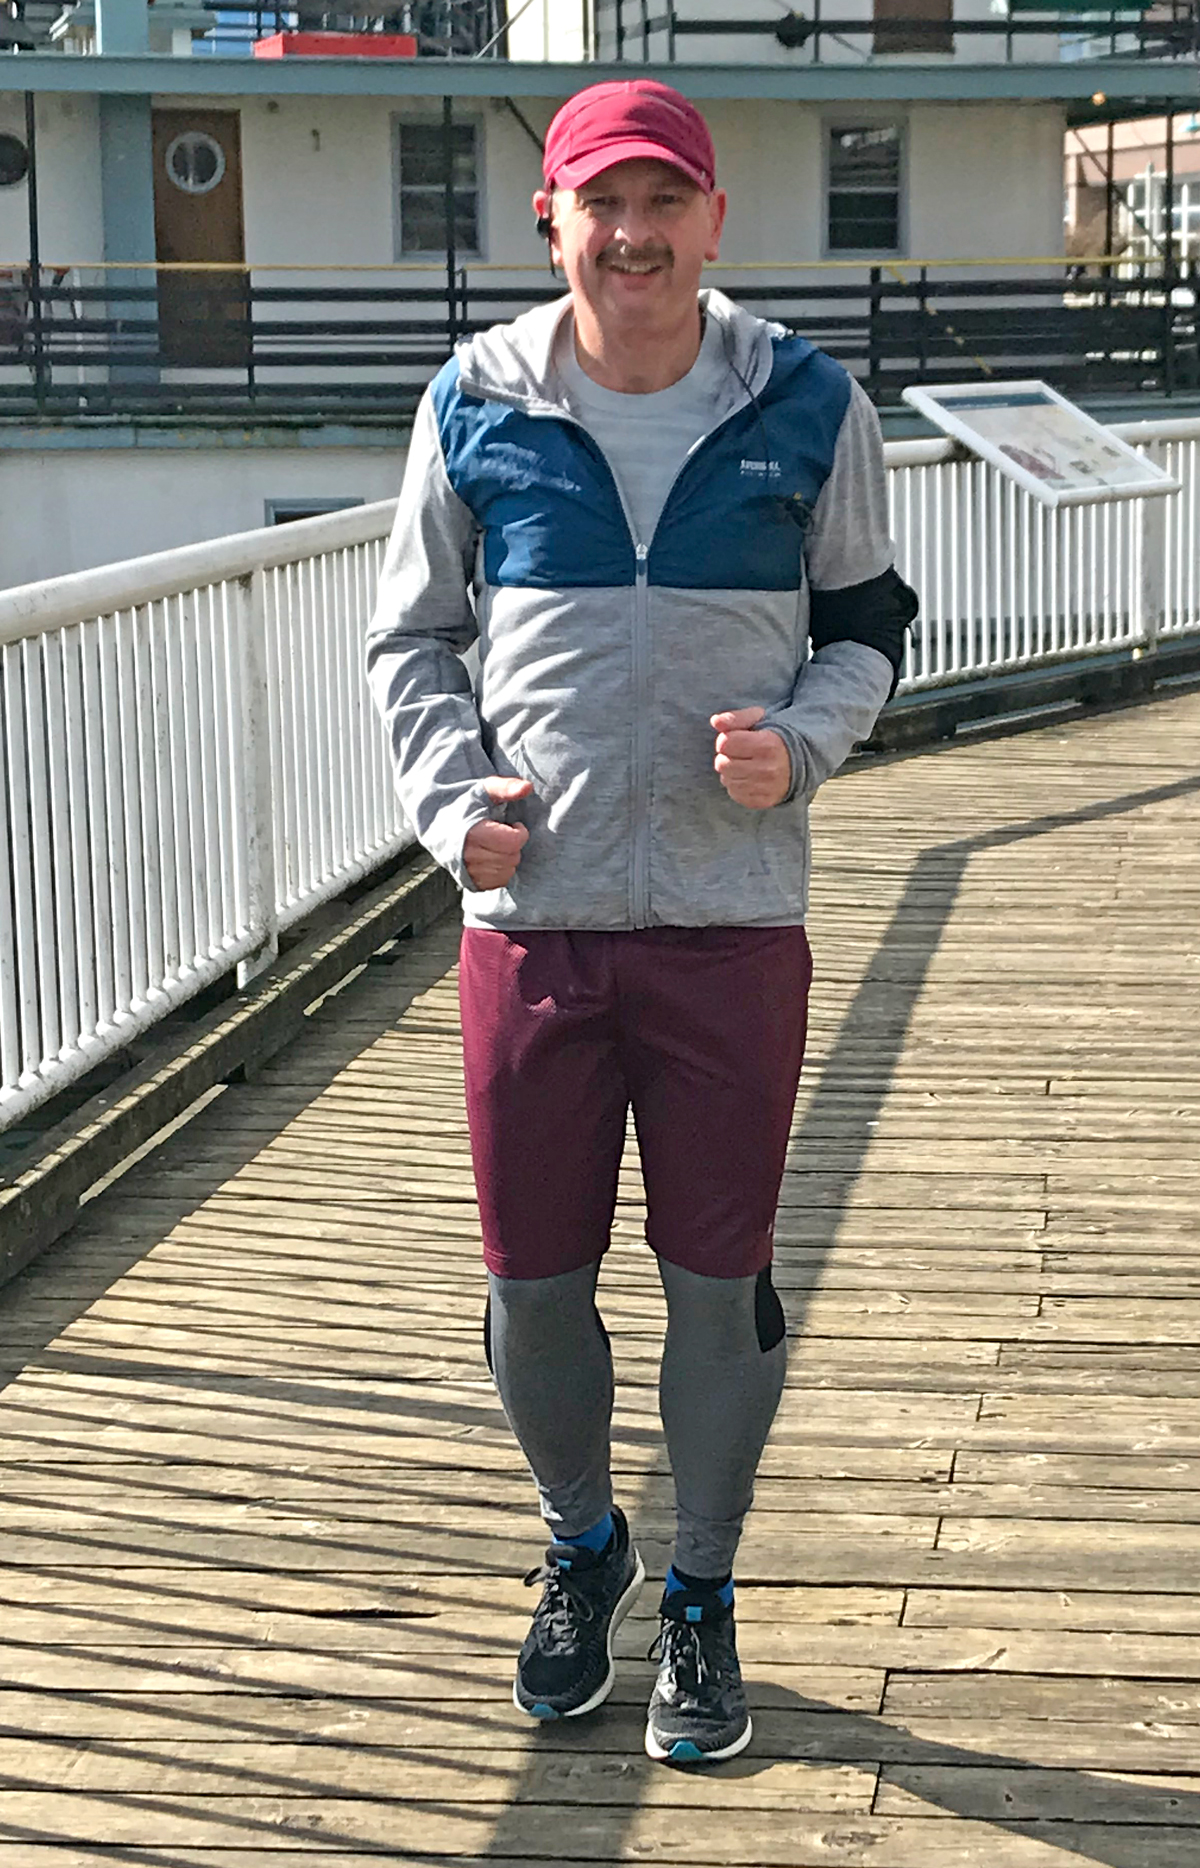 CPO2 Stan Budden’s amazing weight loss is clearly recognizable as he jogs along the New Westminster Quay in Vancouver March 4.